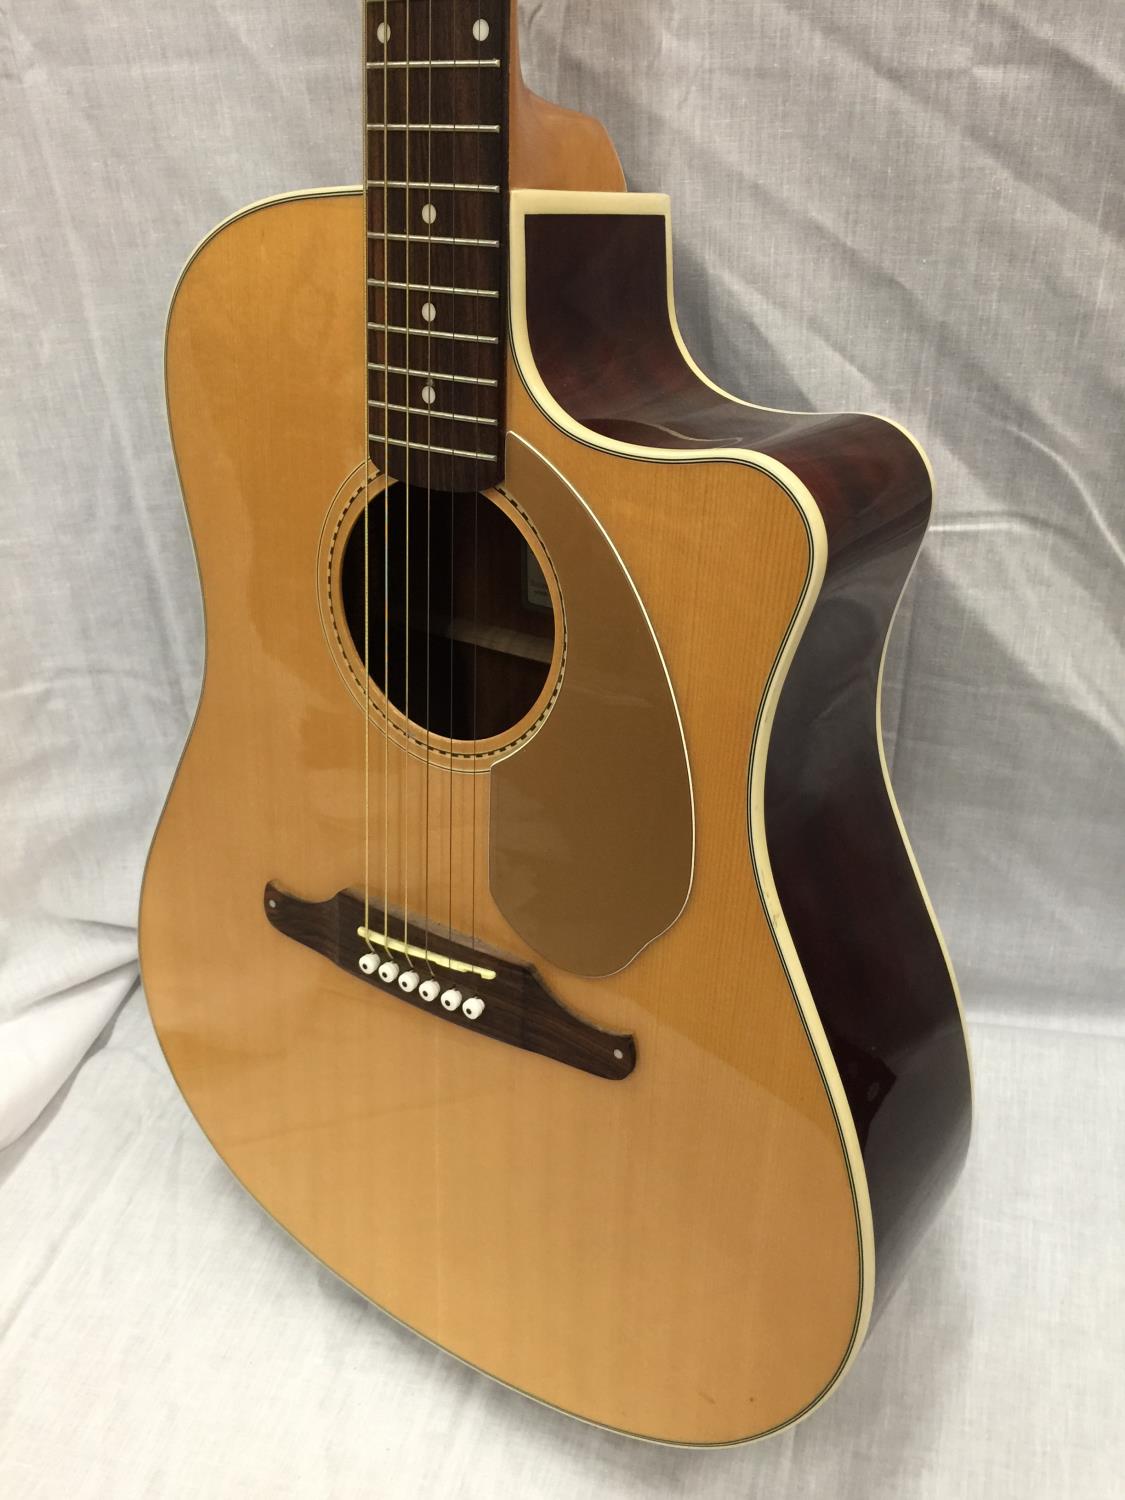 A FENDER REDONDO ELECTRIC ACOUSTIC CALIFORNIA SERIES GUITAR - Image 2 of 13